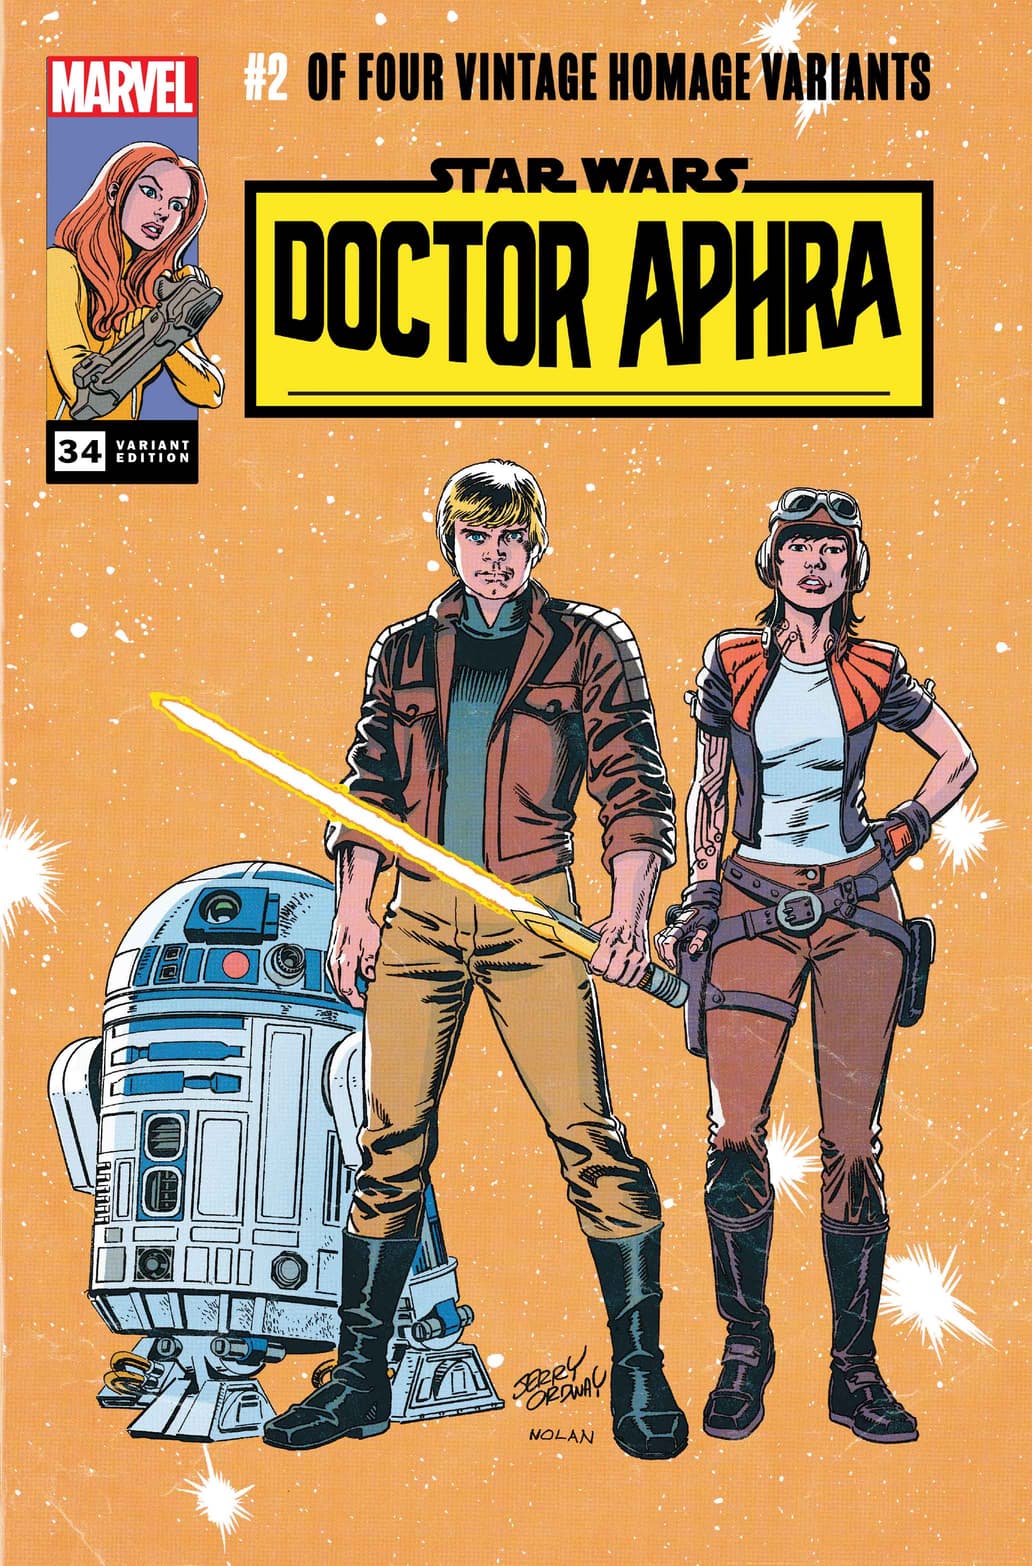 STAR WARS: DOCTOR APHRA #34 Classic Trade Dress Variant Cover by Jerry Ordway and Nolan Woodward